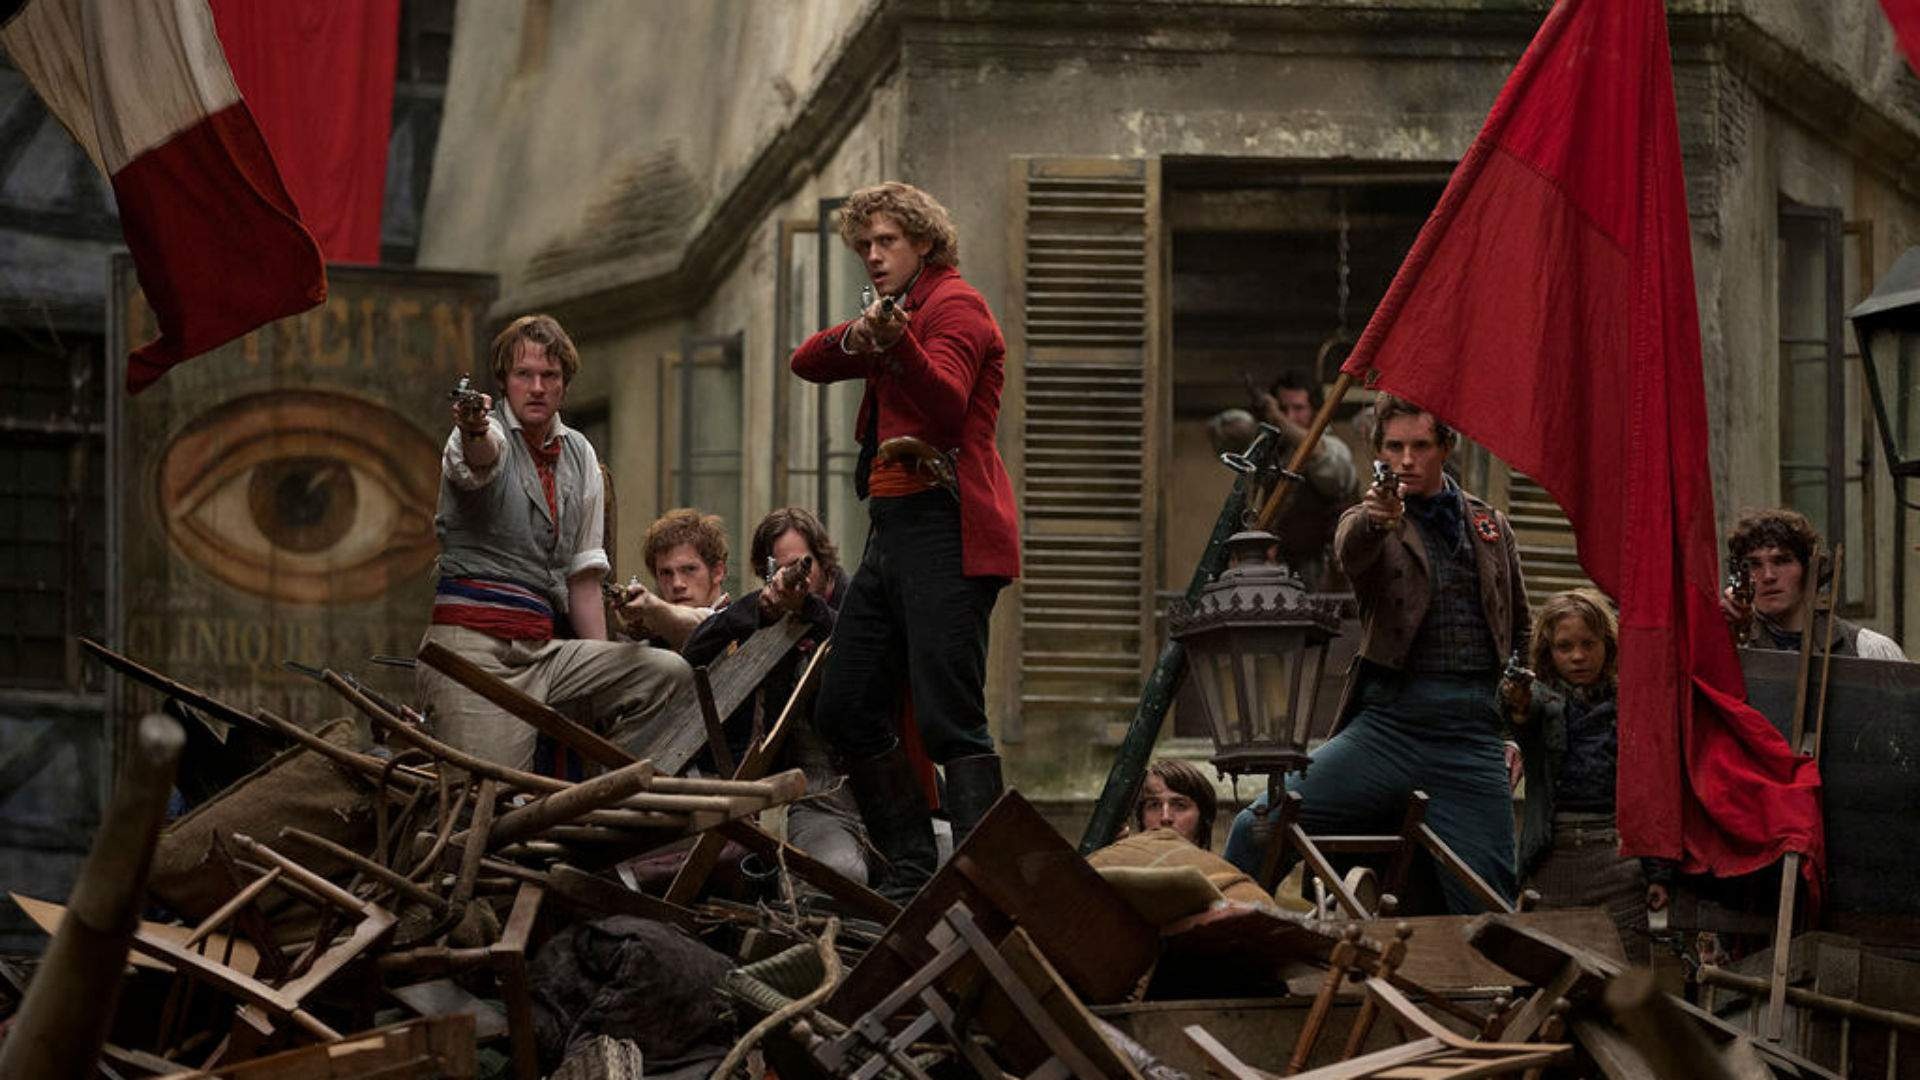 Les Miserables: The film premiered at Leicester Square in London on 5 December 2012. 1920x1080 Full HD Wallpaper.